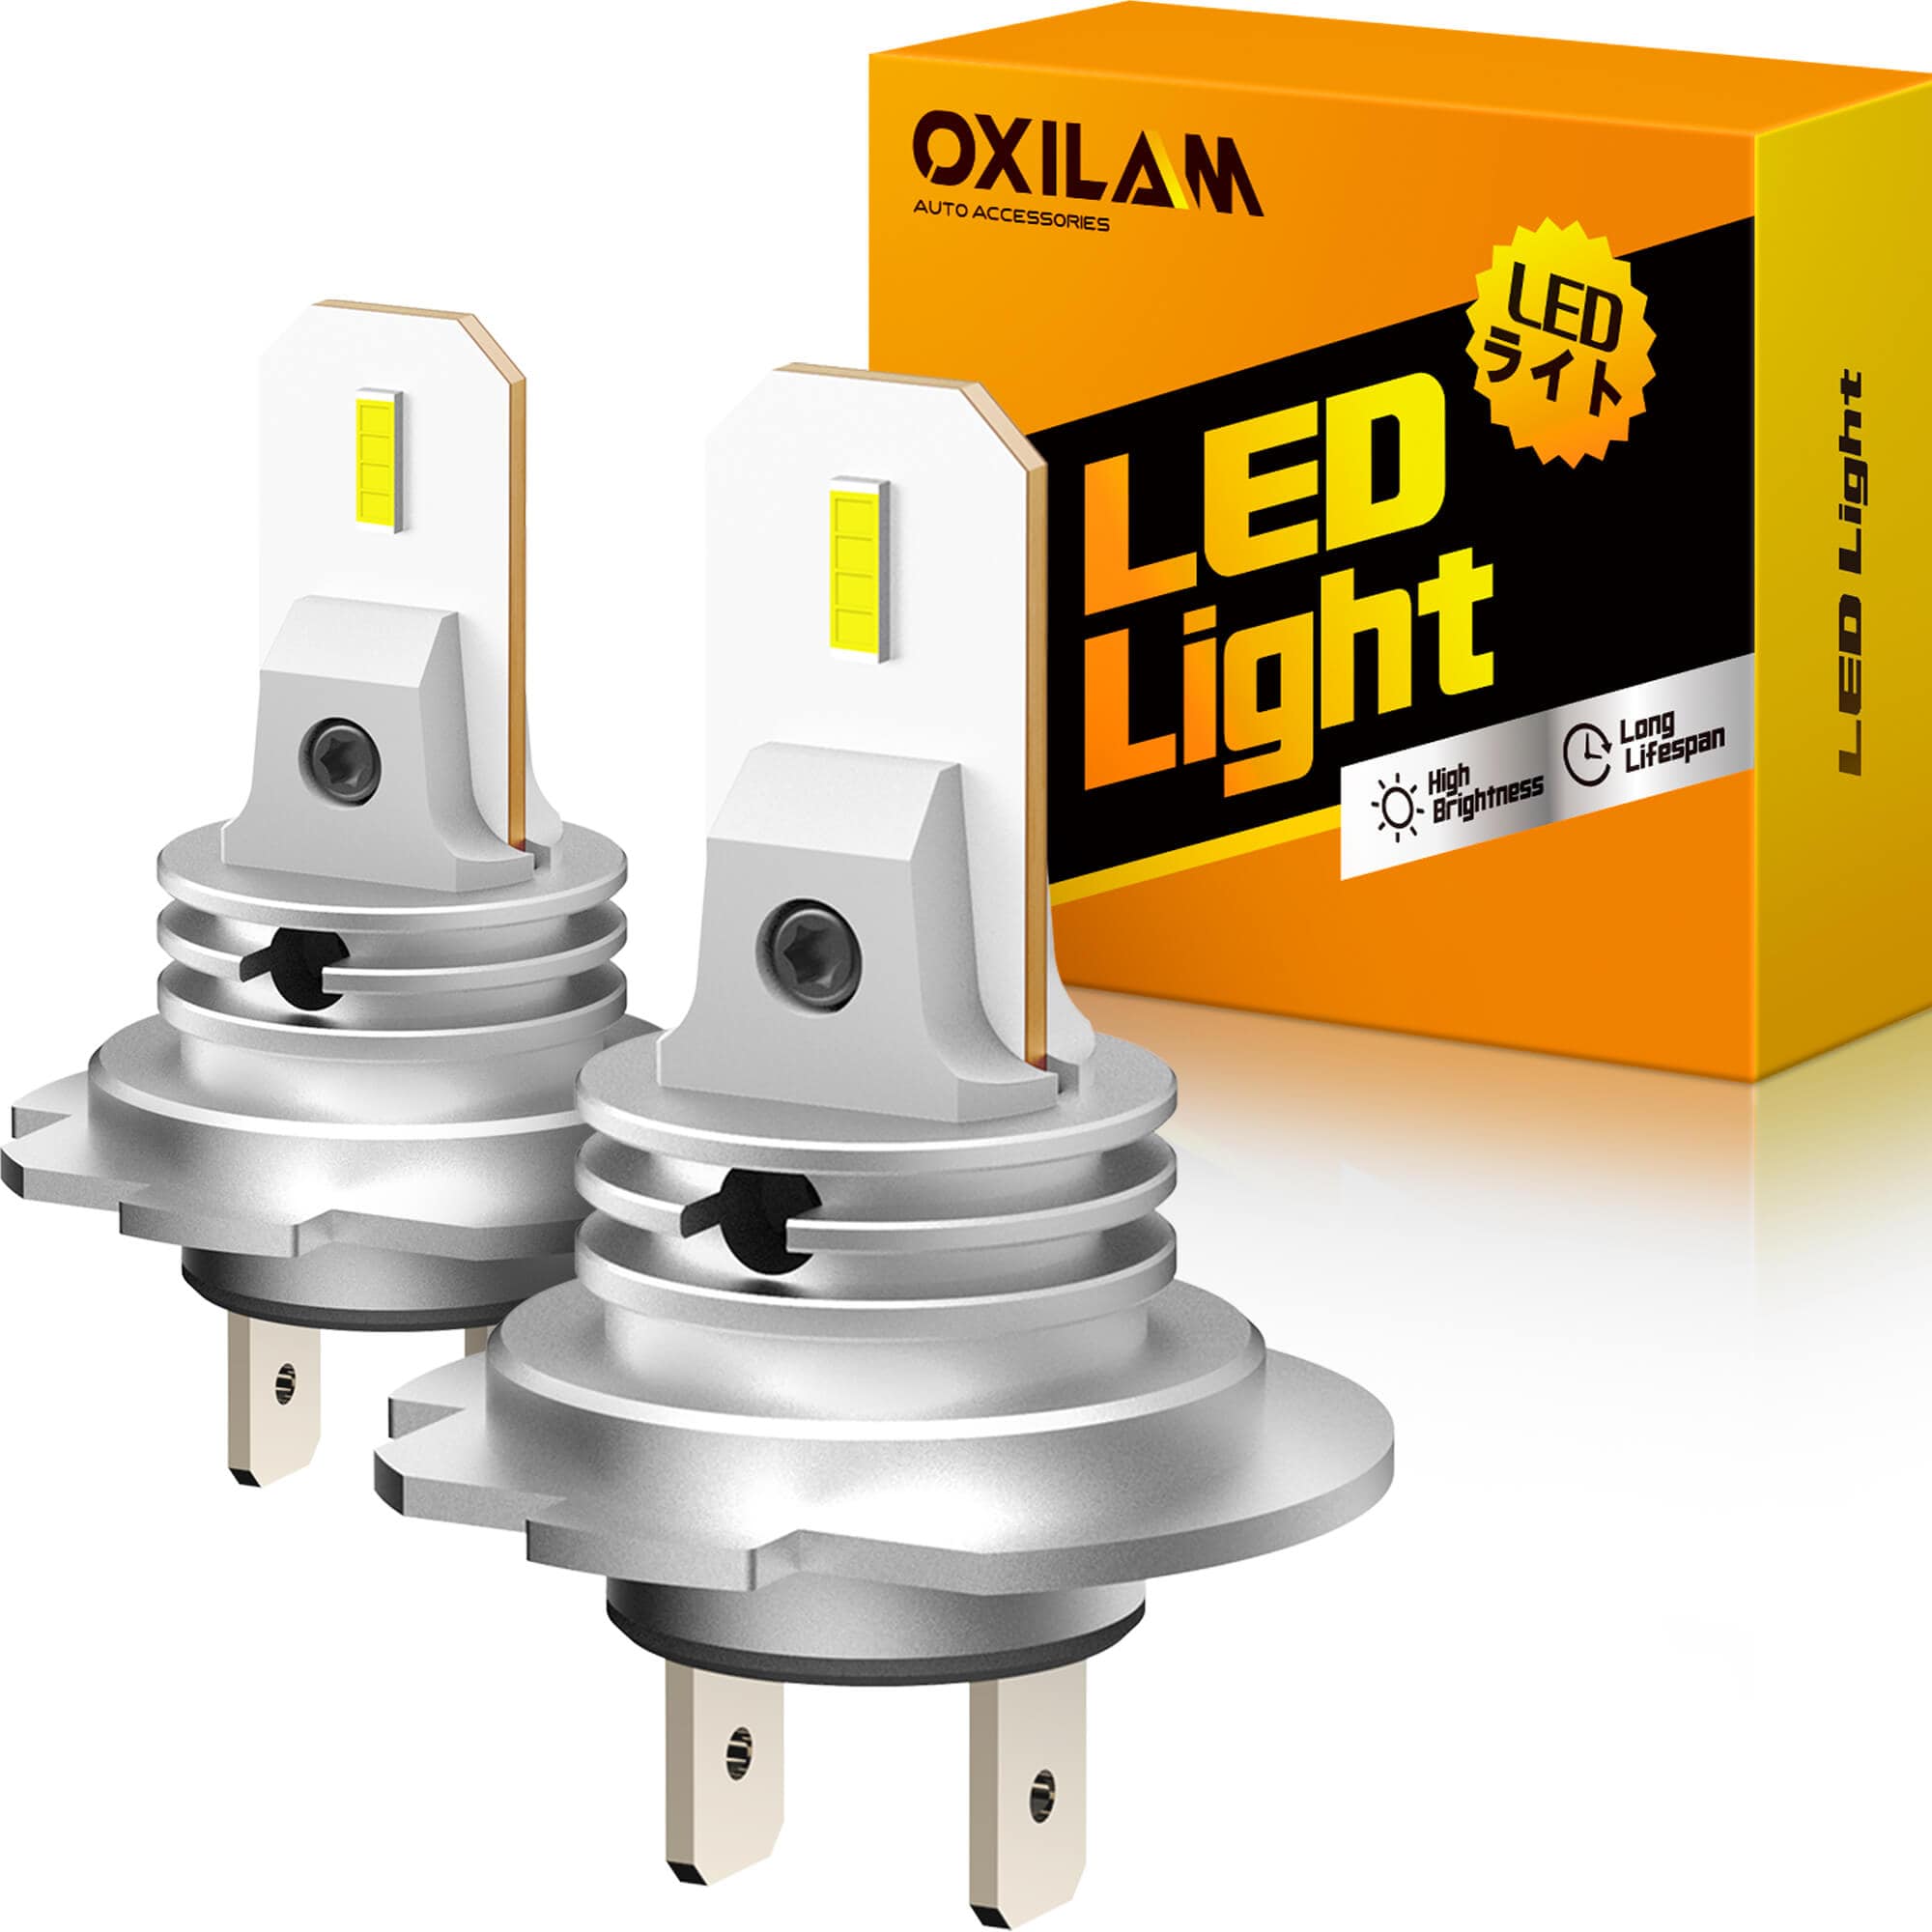 https://oxilam.com/cdn/shop/products/oxilam-h7-led-headlight-bulbs-csp-led-chips-6500k-cool-white-1-1-mini-size-no-adapter-required-h7-gf-w2-oxilam-30009007341681_2000x.jpg?v=1656313280